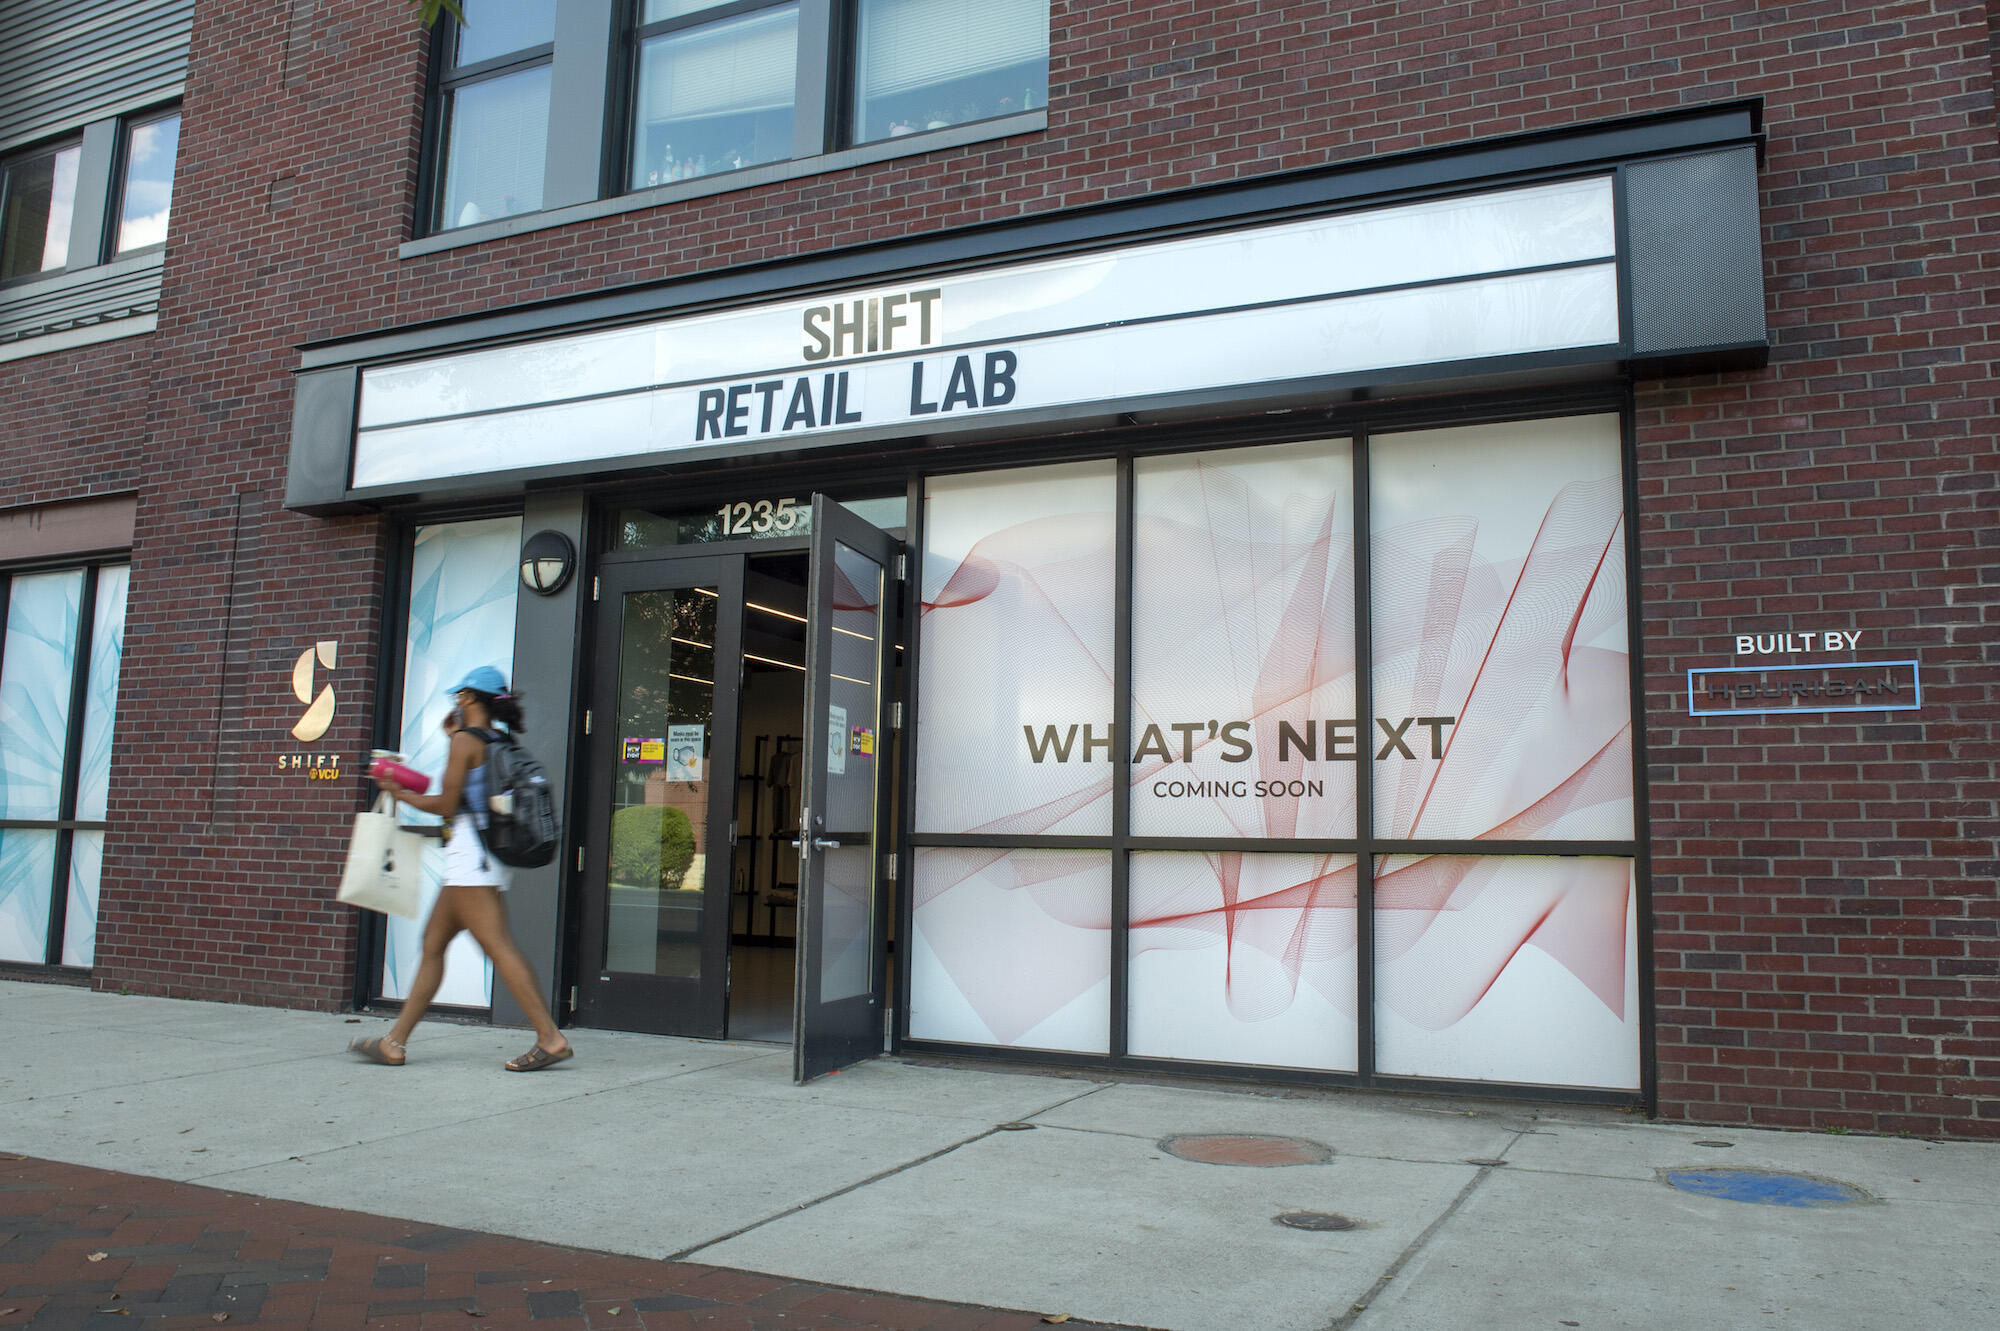 The front entrance of the Shift Retail Lab